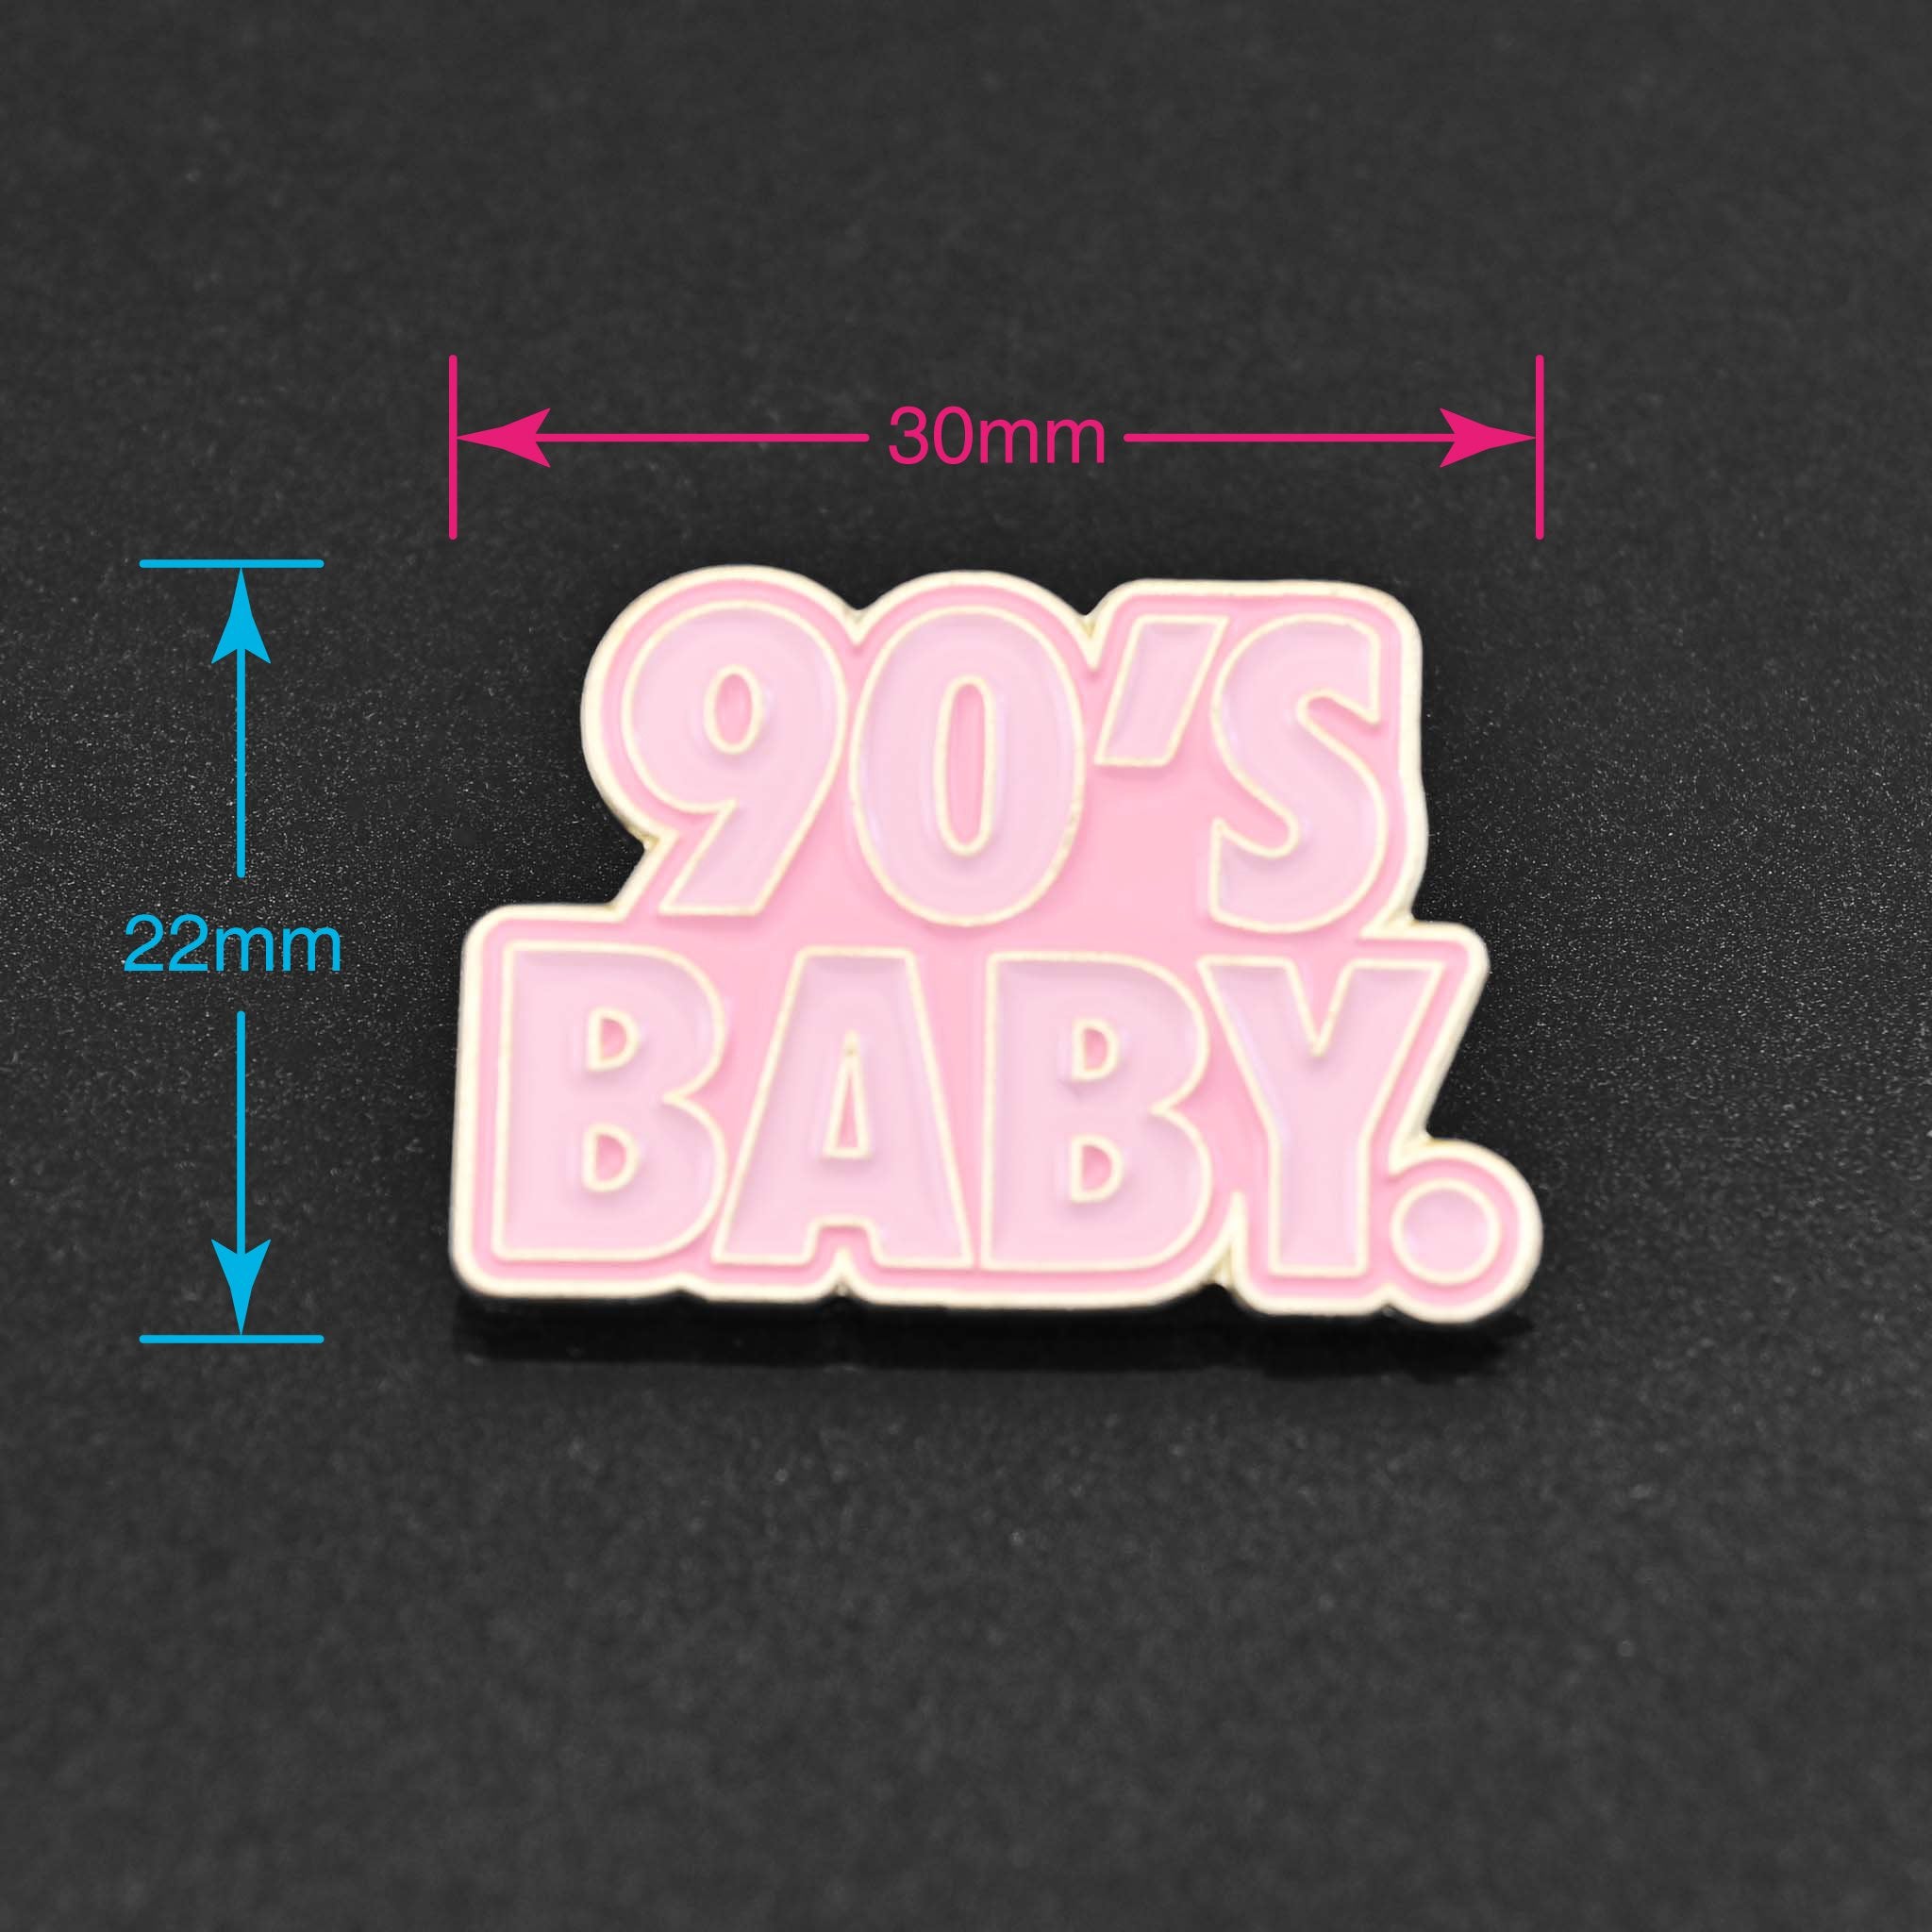 A pink enamel pin that says 90's Baby - perfect for the Millennial in your life 